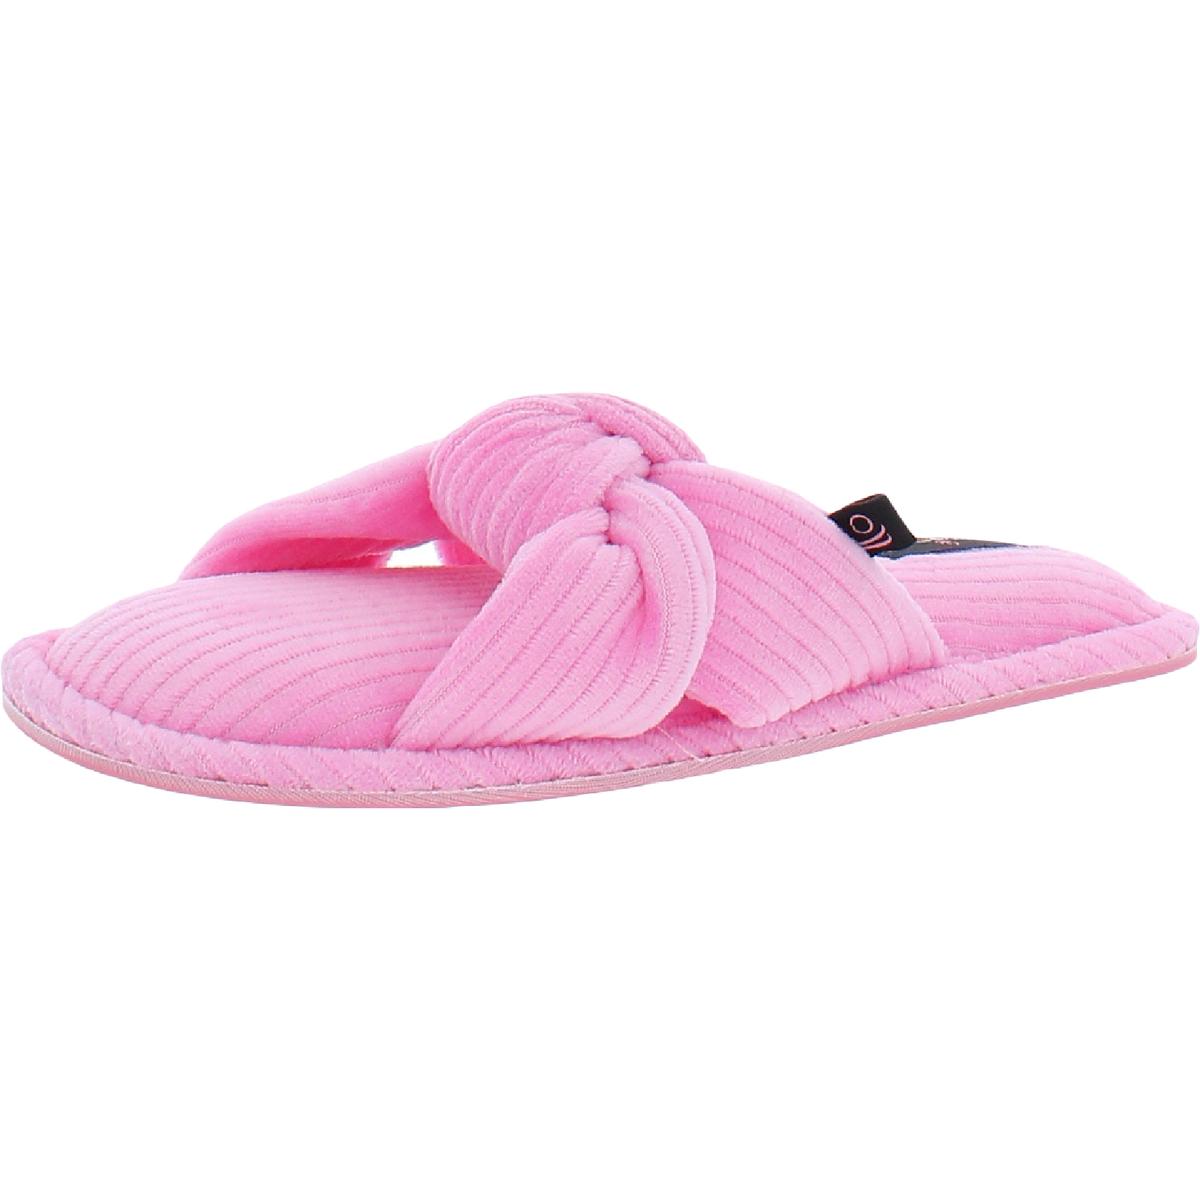 Cuddl Duds Womens Slip On Padded Insole Slide Slippers